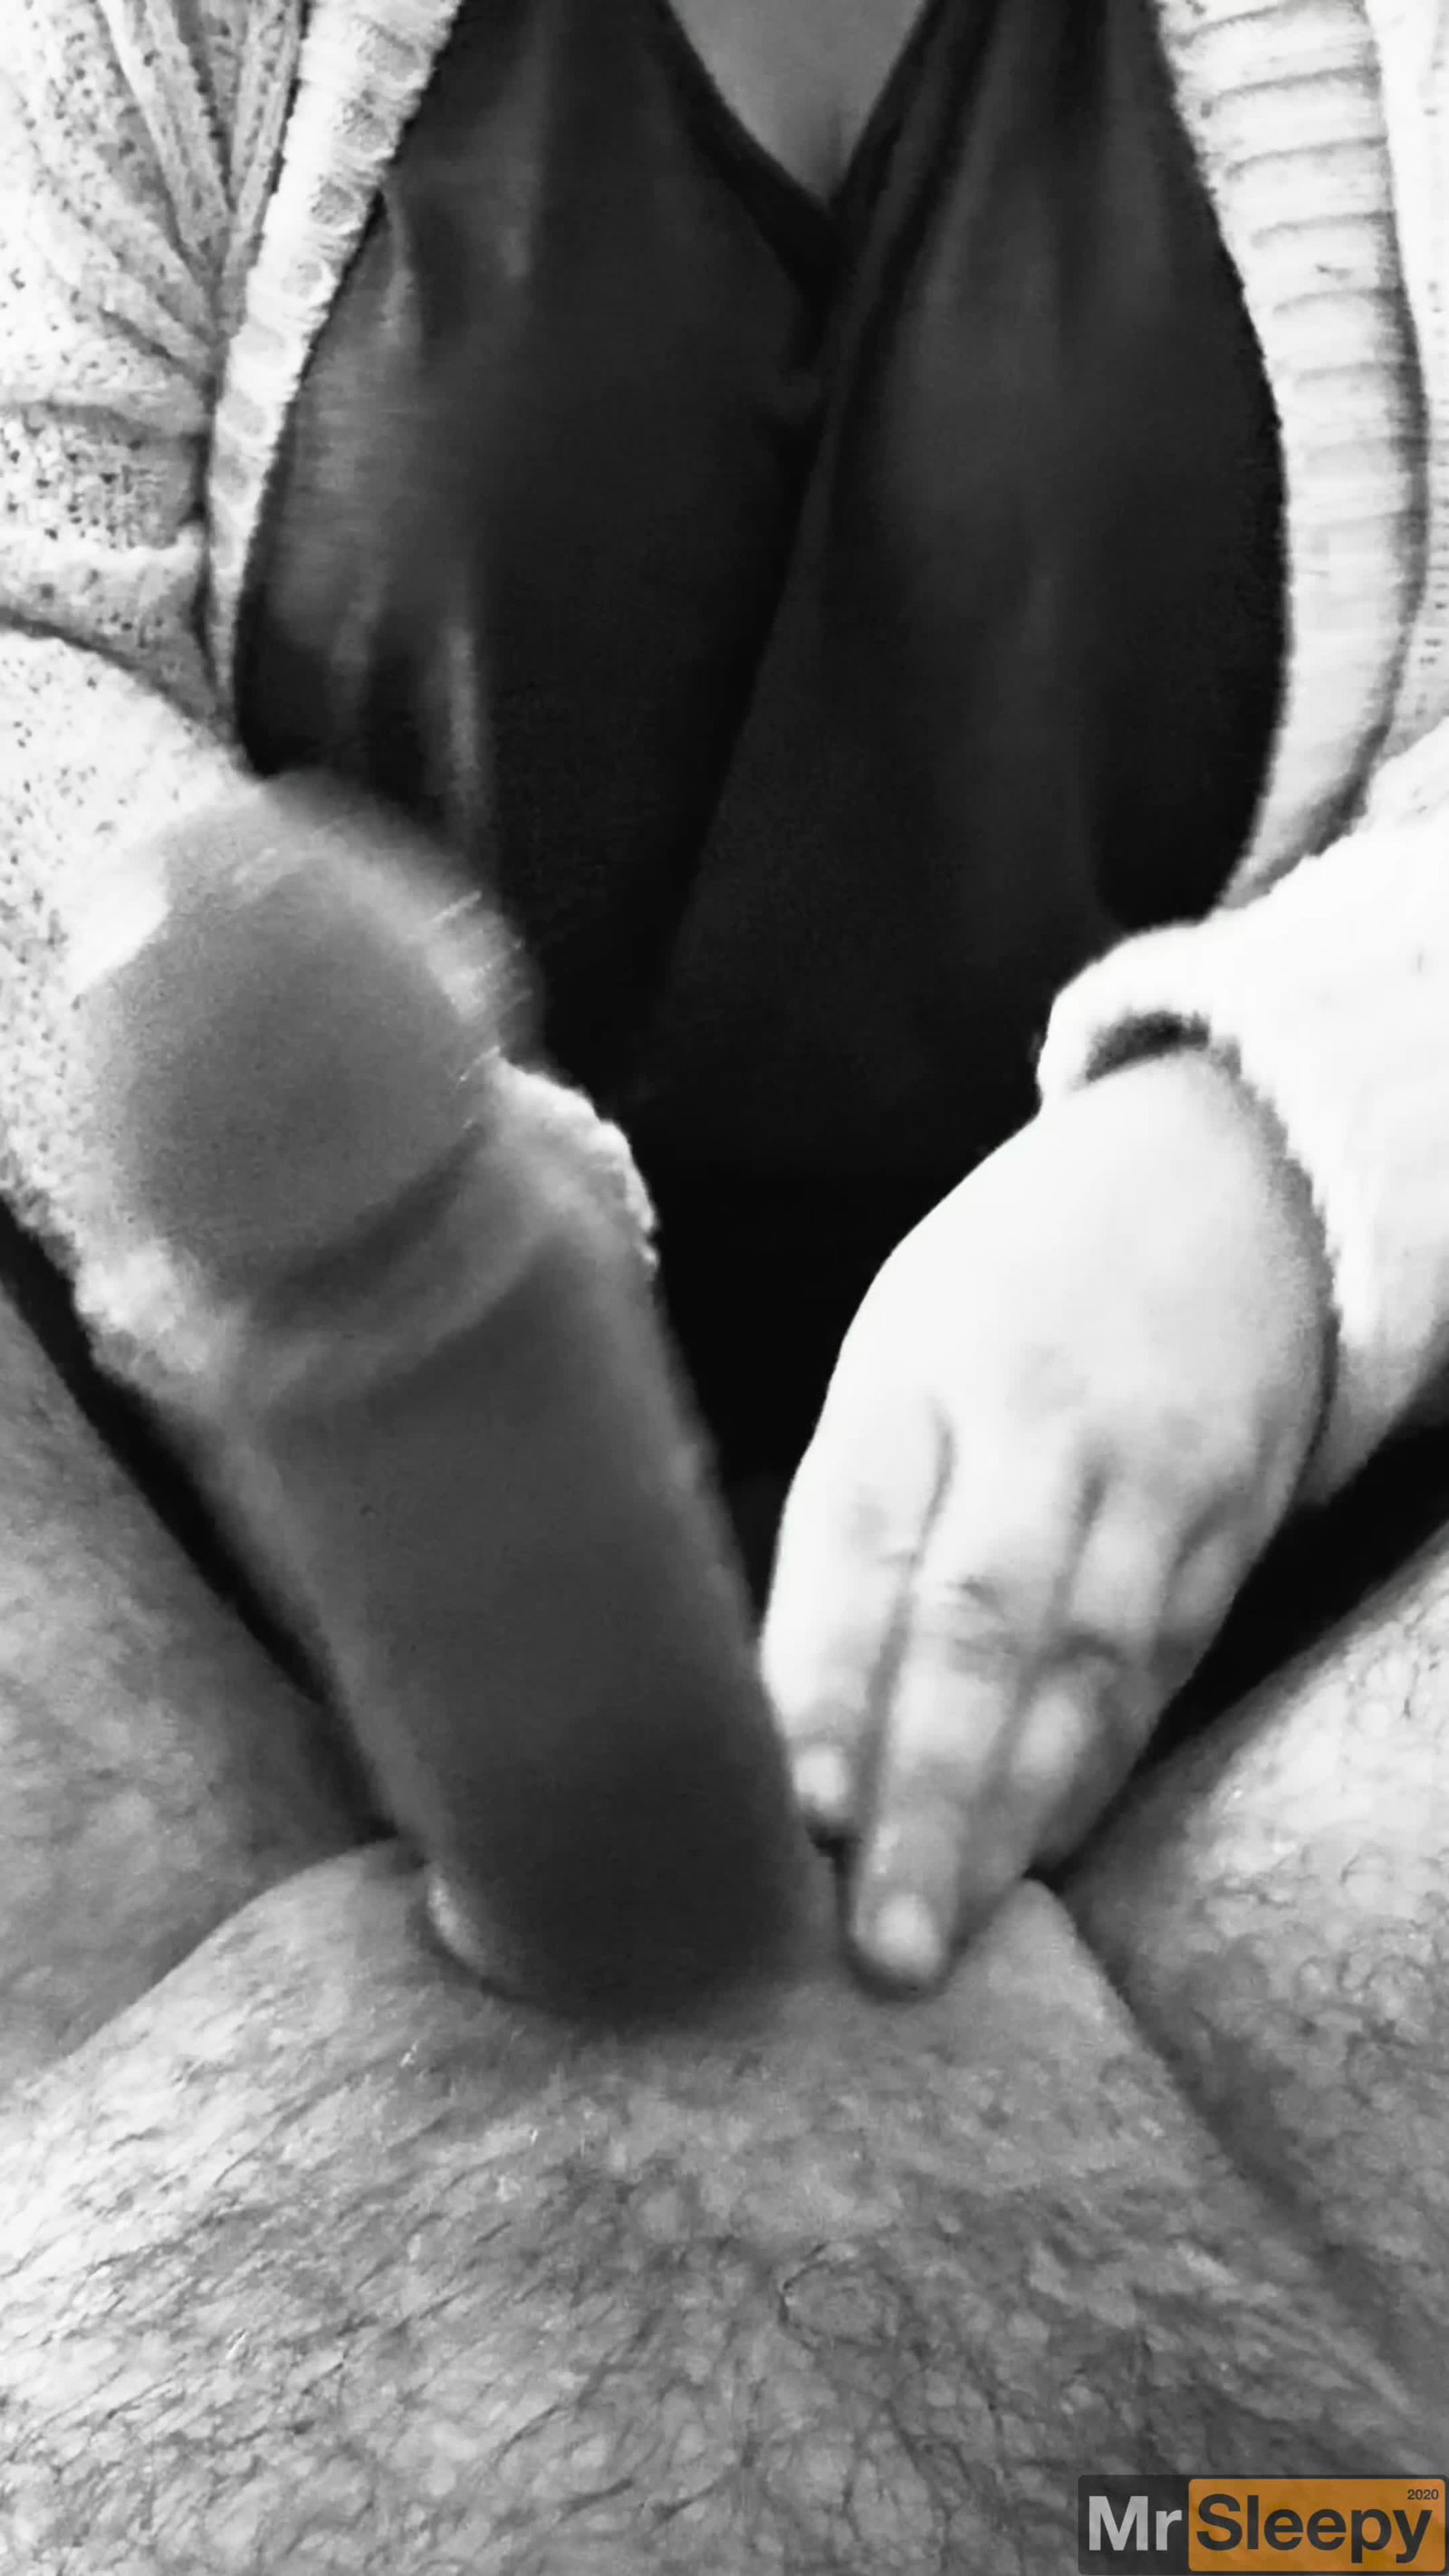 Video by MrSleepy with the username @MrSleepy, who is a verified user,  December 29, 2023 at 10:27 PM. The post is about the topic Handjob and the text says 'Cumshot in black & white after a long edging session! 🍆💦😍
Watch our full videos here https://www.pornhub.com/model/mrsleepy2020/videos?o=tr
#wife #handjob #MrSleepyOriginal #amateur #homemade #uncut #foreskin'